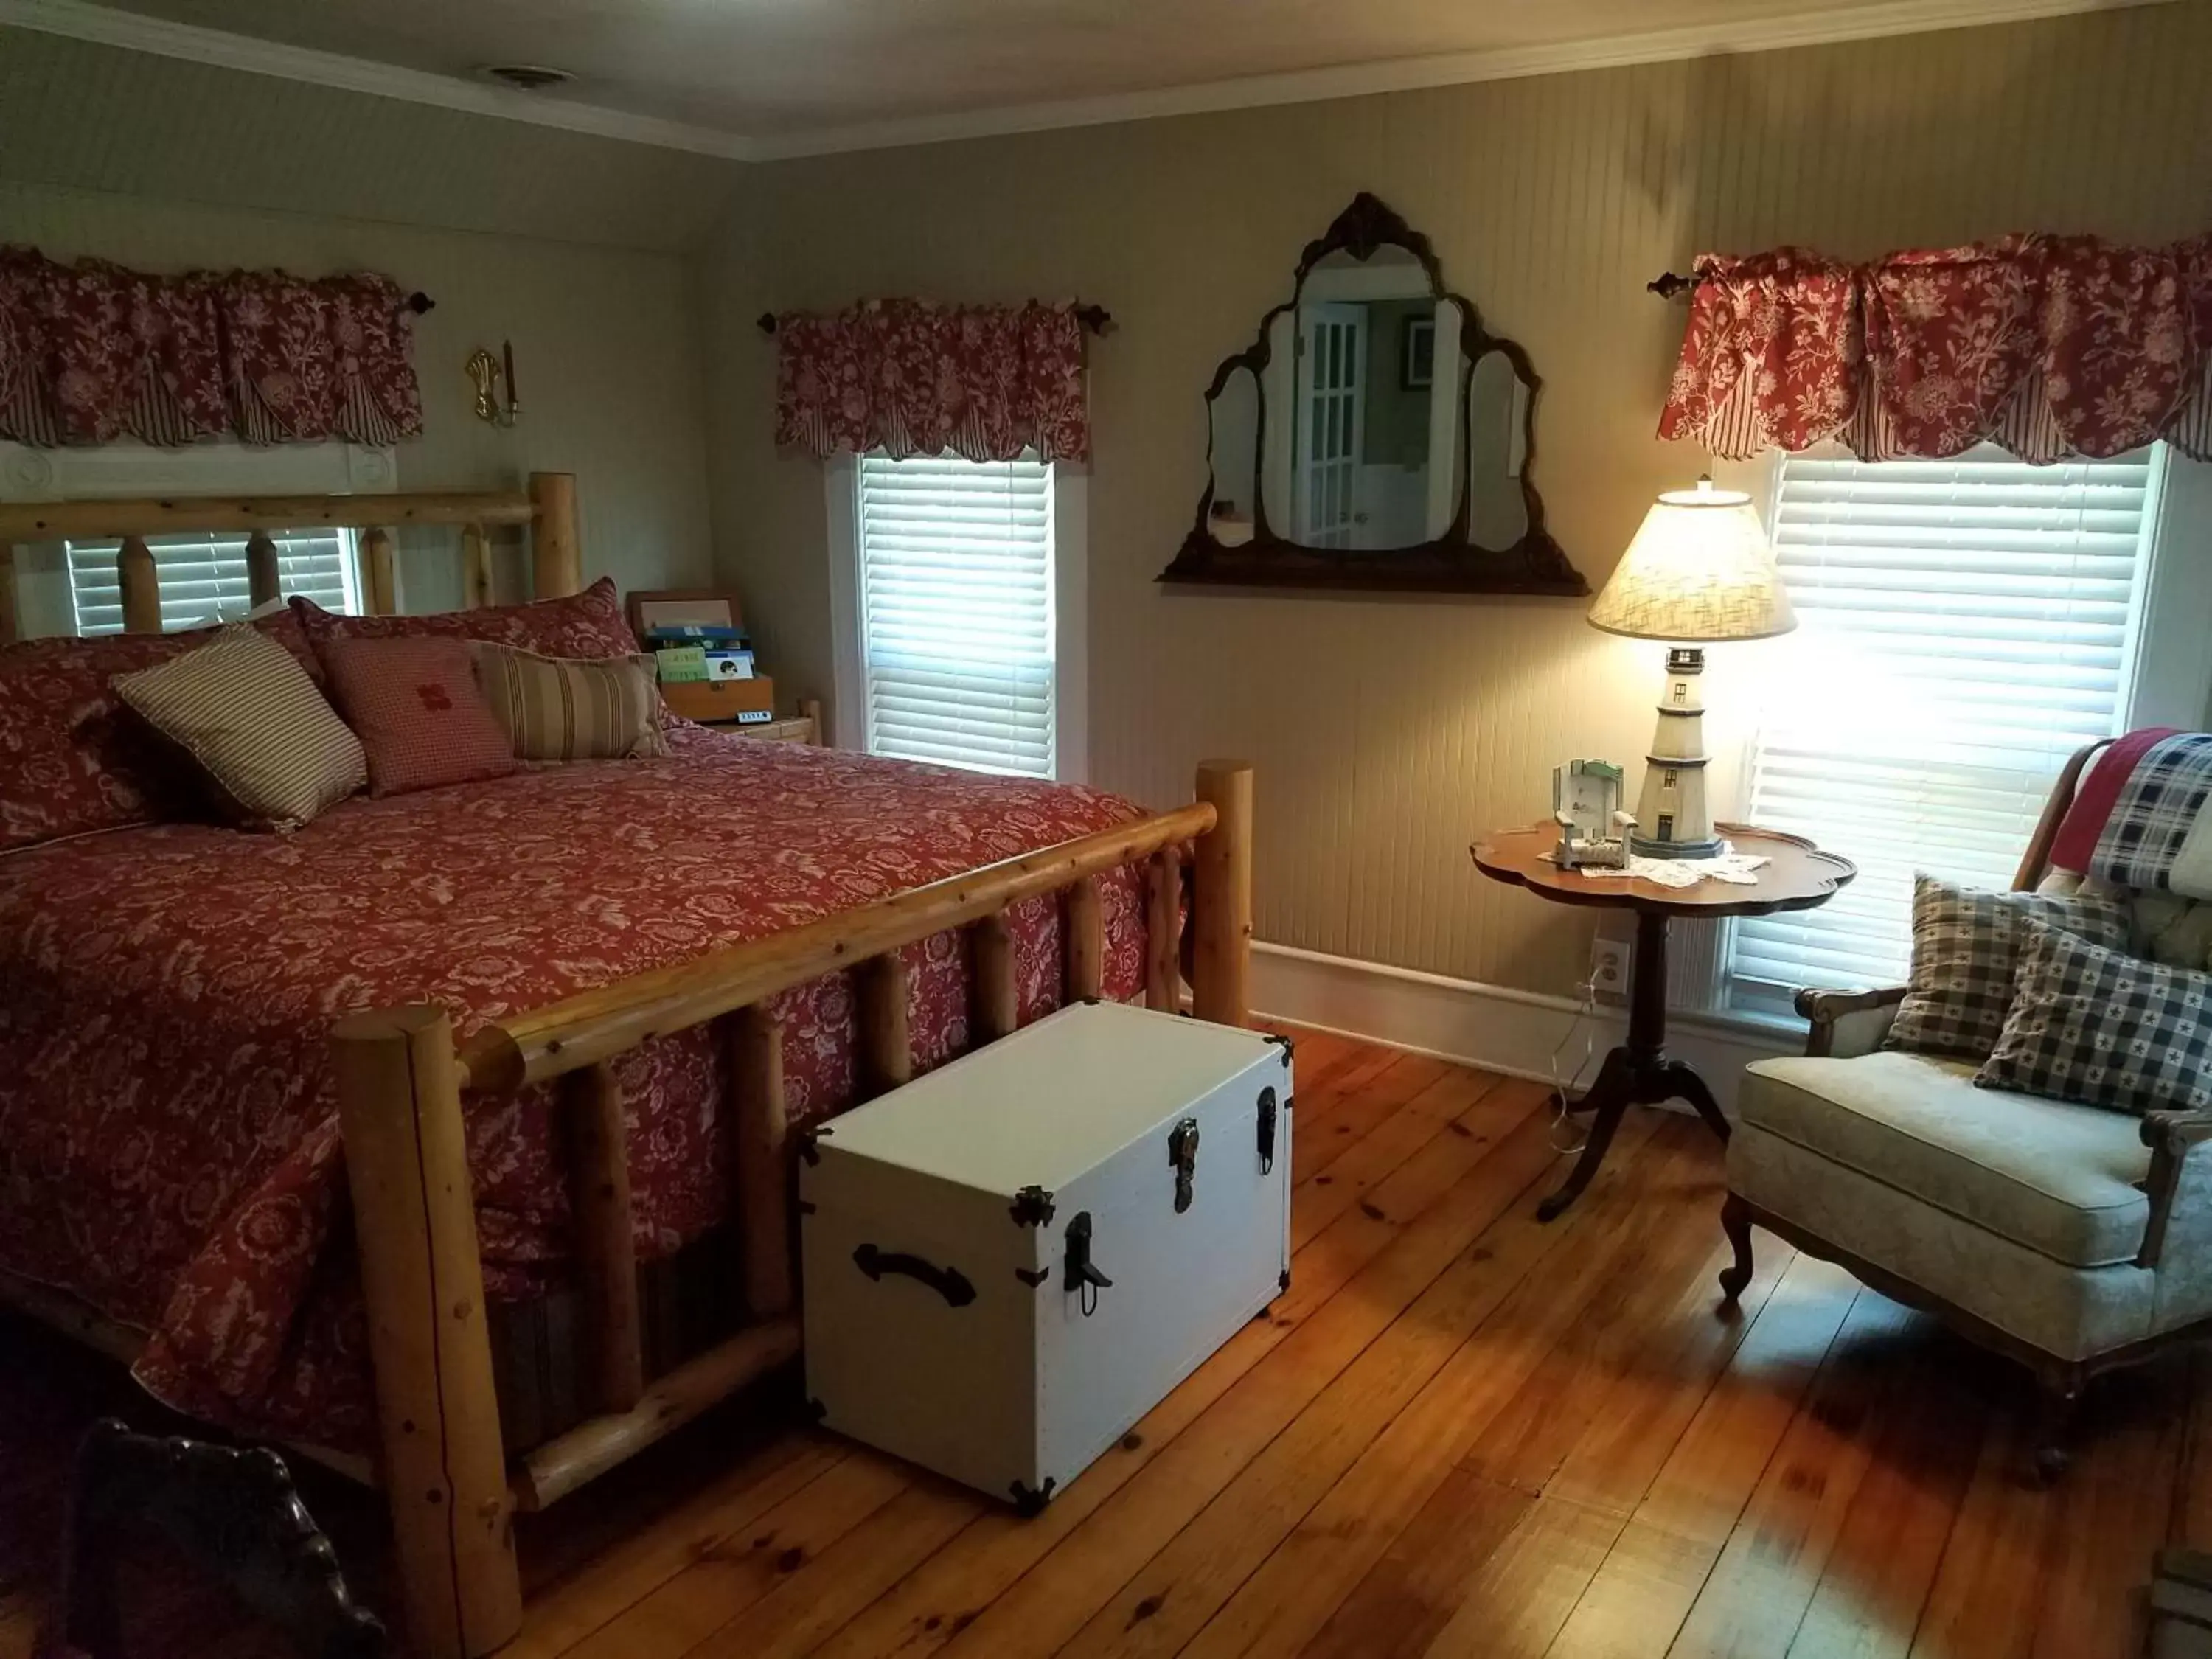 Superior King Room in Dragonfly Bed and Breakfast